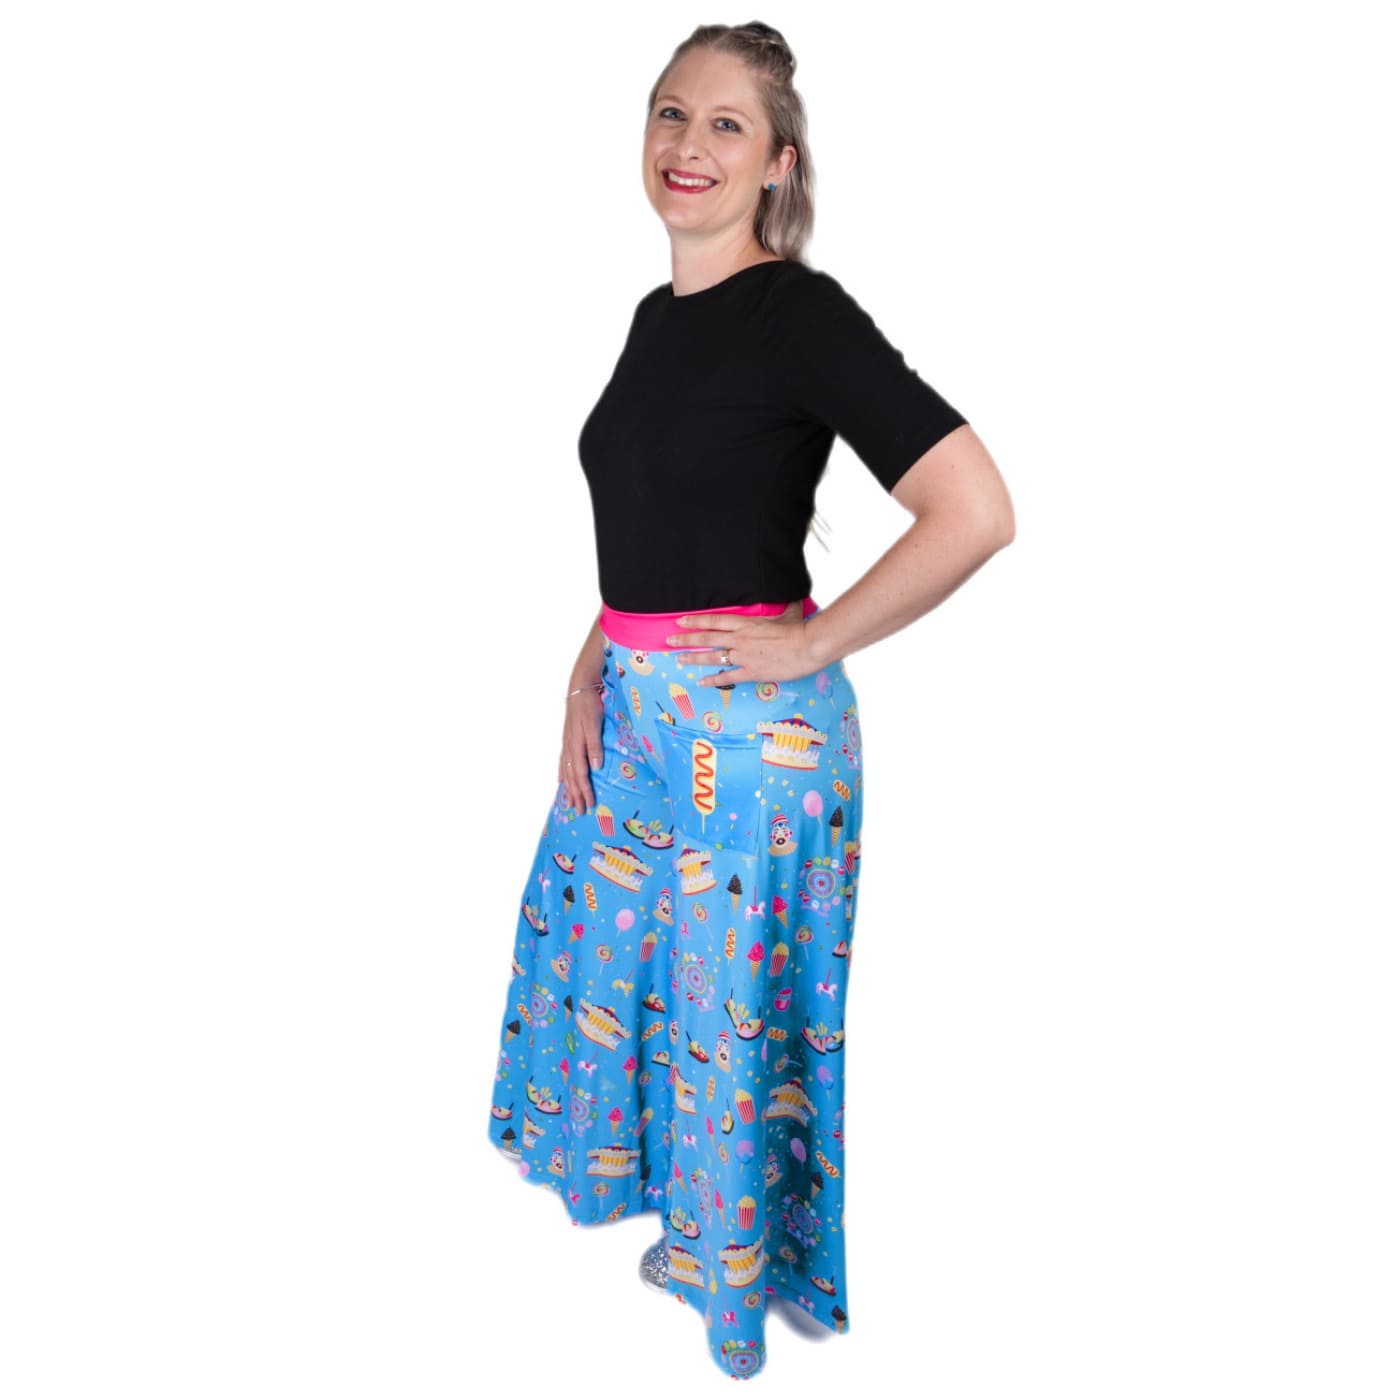 Day At The Fair Wide Leg Pants by RainbowsAndFairies.com.au (Carnival - Carousel - Ferris Wheel - Pants With Pockets - Vintage Inspired - Flares) - SKU: CL_WIDEL_DAYFA_ORG - Pic-04